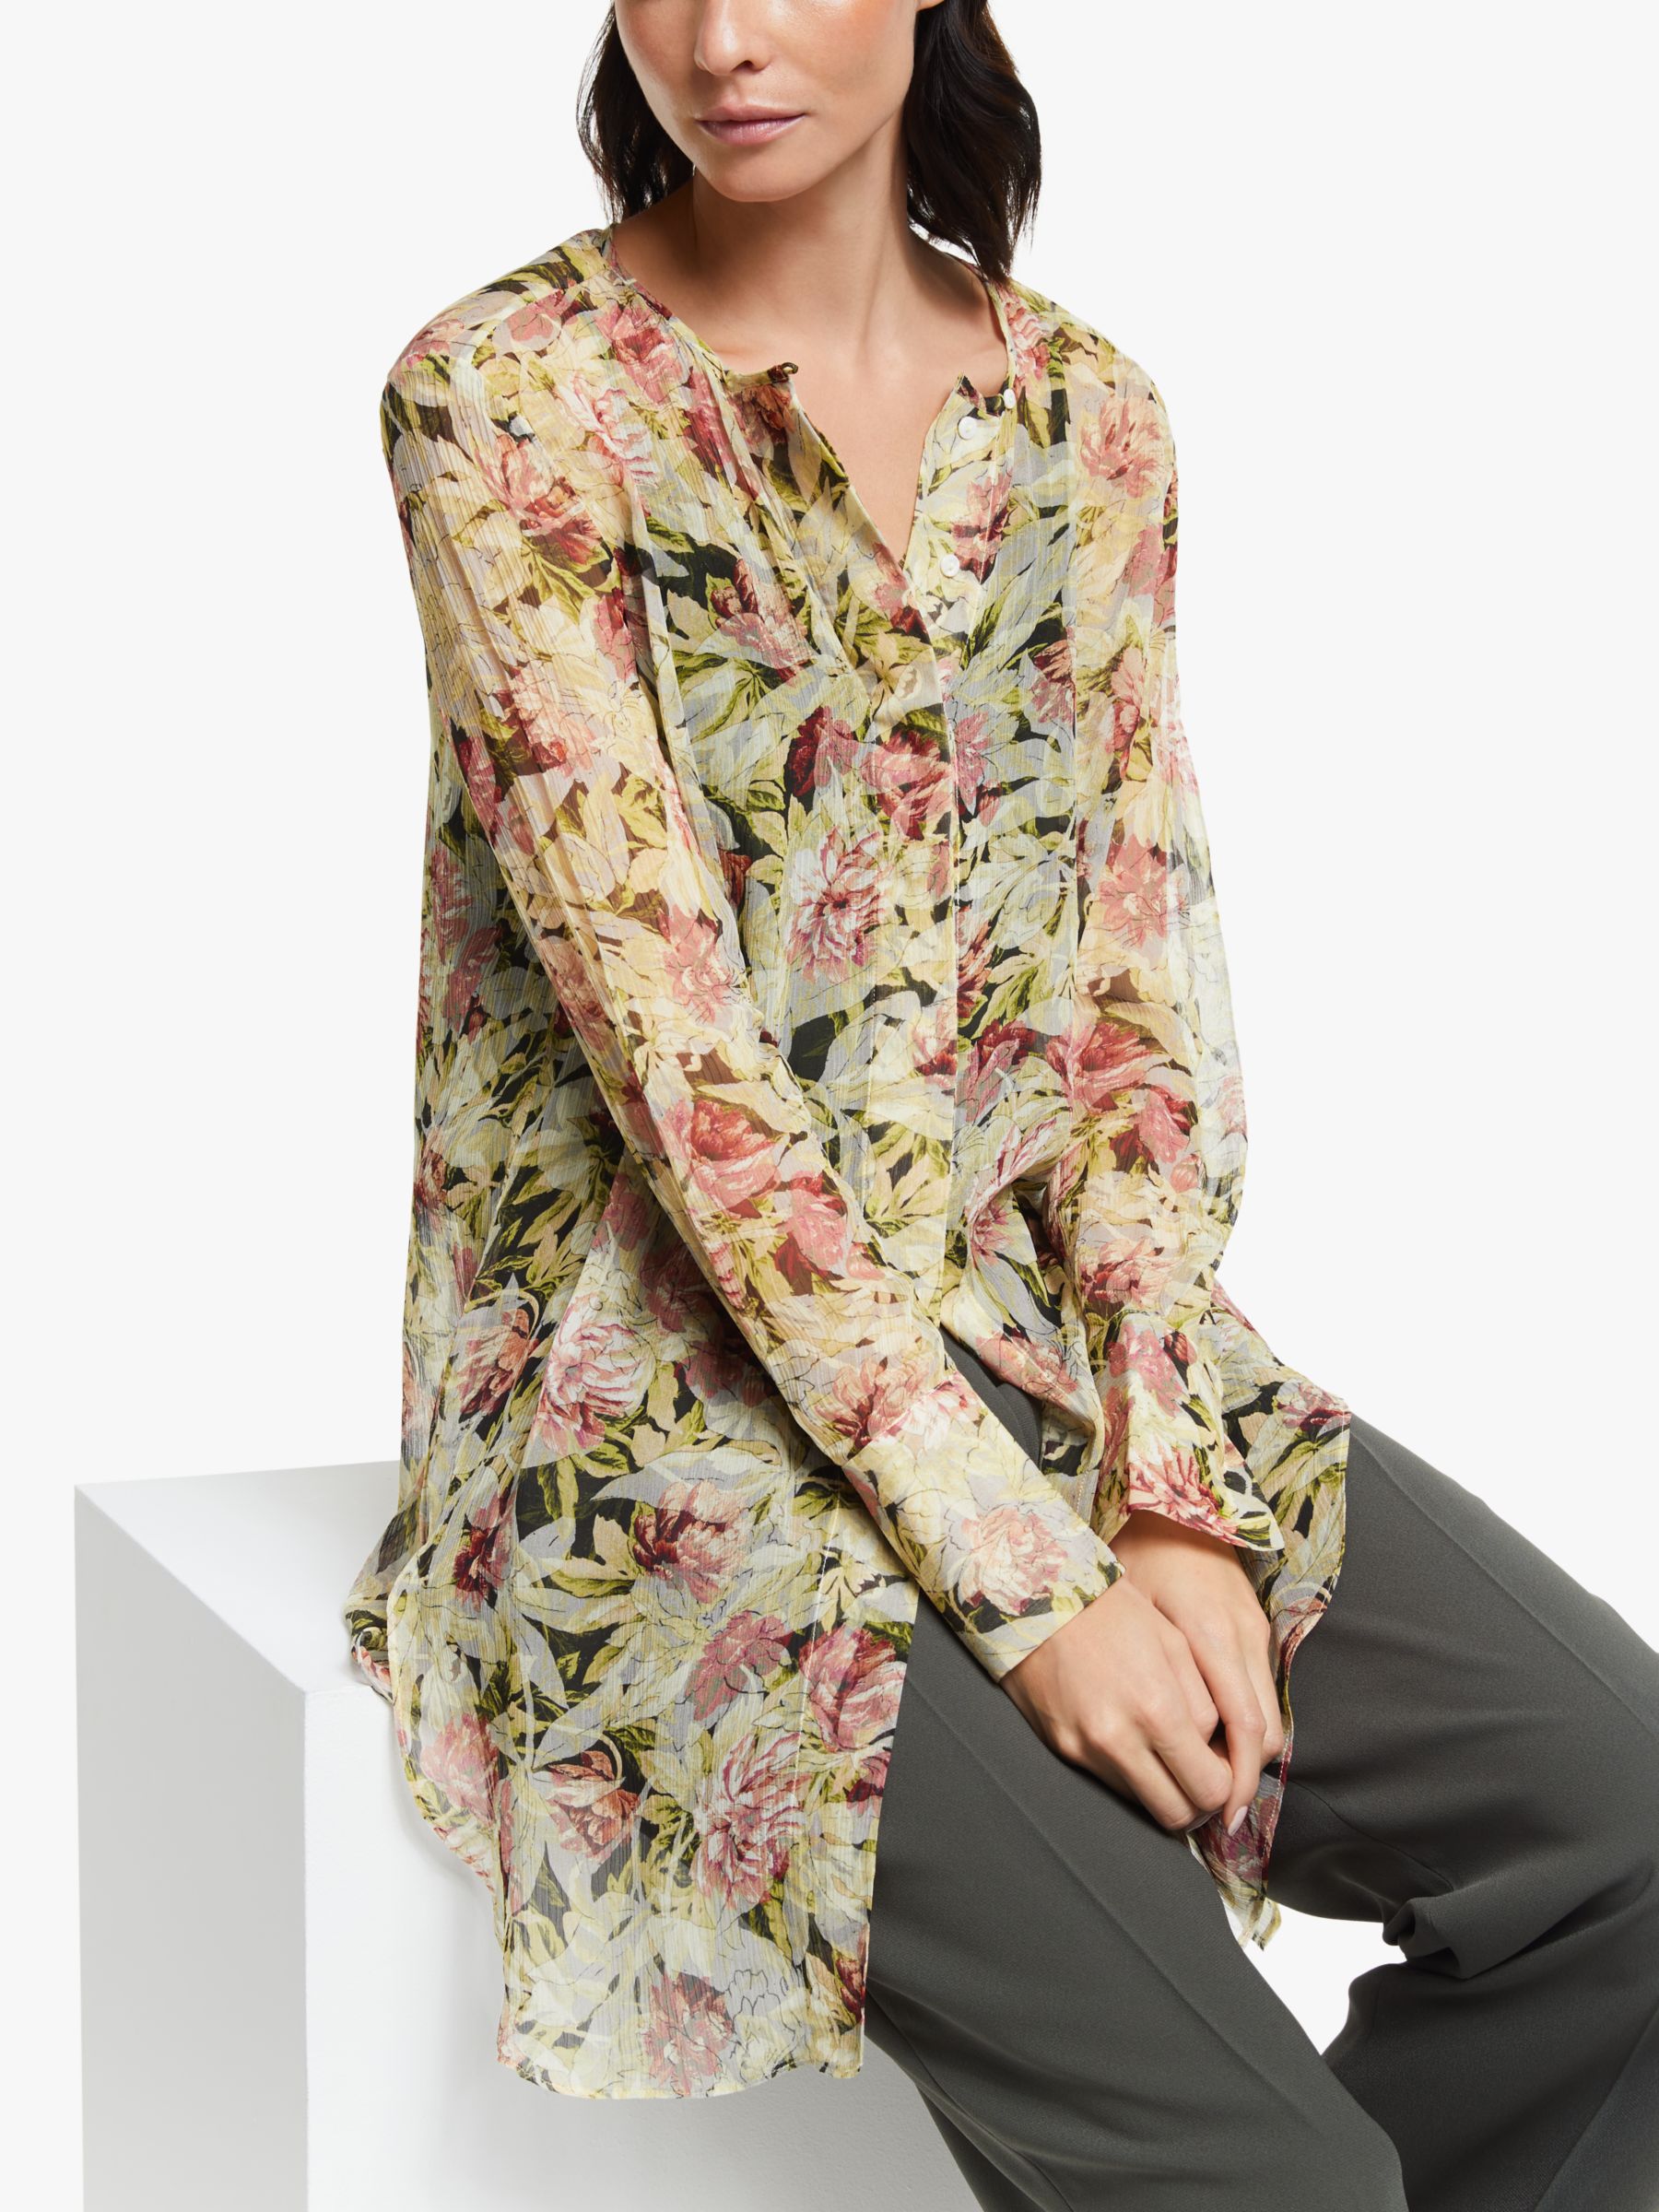 John Lewis Archive Floral Print Tie Front Tunic Top, Pink/Multi